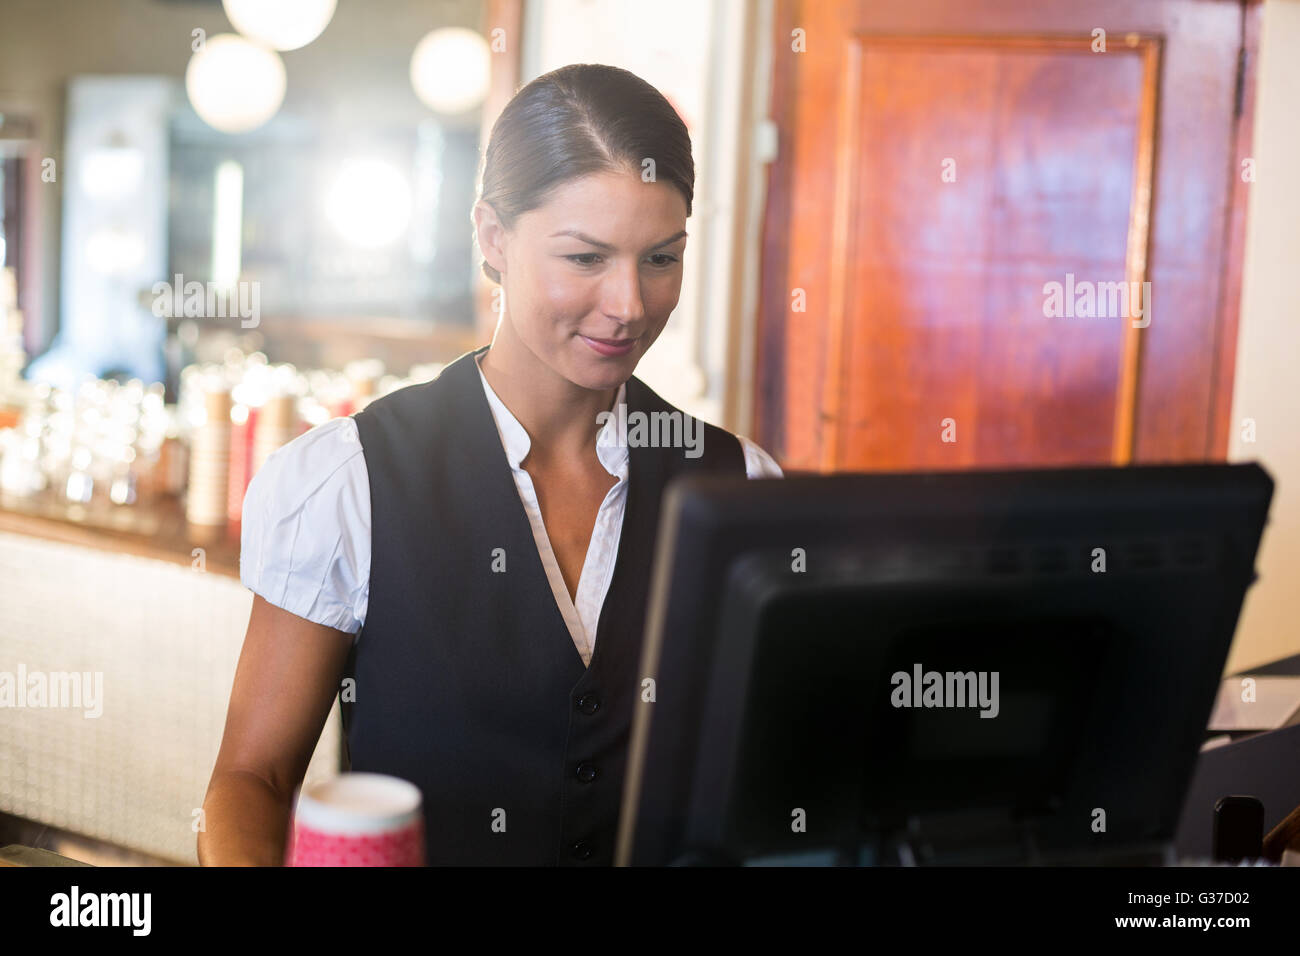 Waitress working on computer at counter Banque D'Images